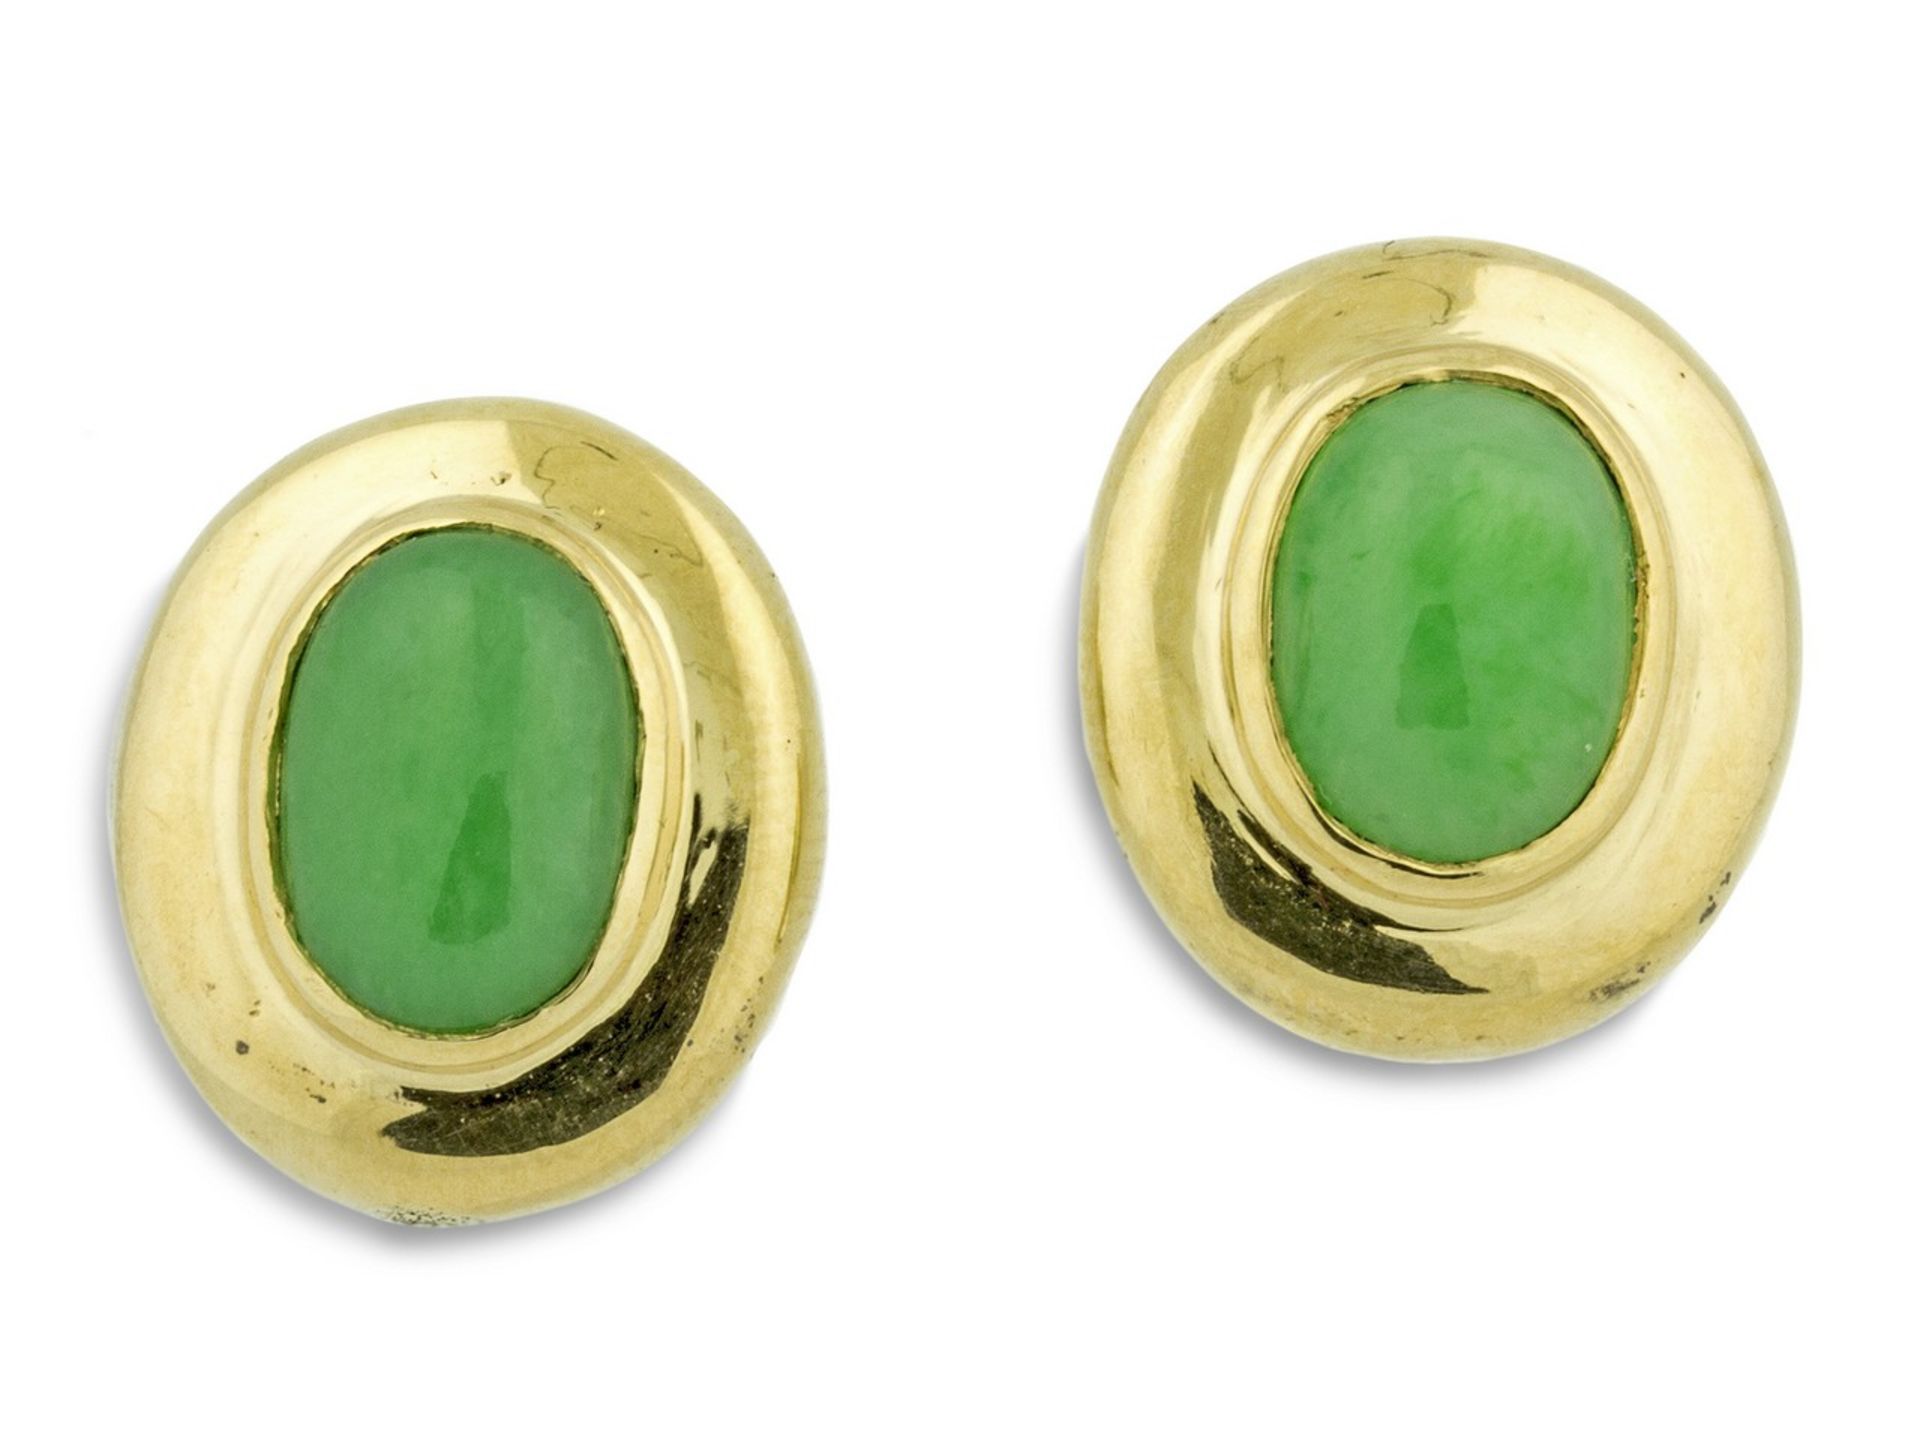 YELLOW GOLD JADE EAR CLIPS Centering an oval cabochon-cut green jade, surrounded by a gold frame,